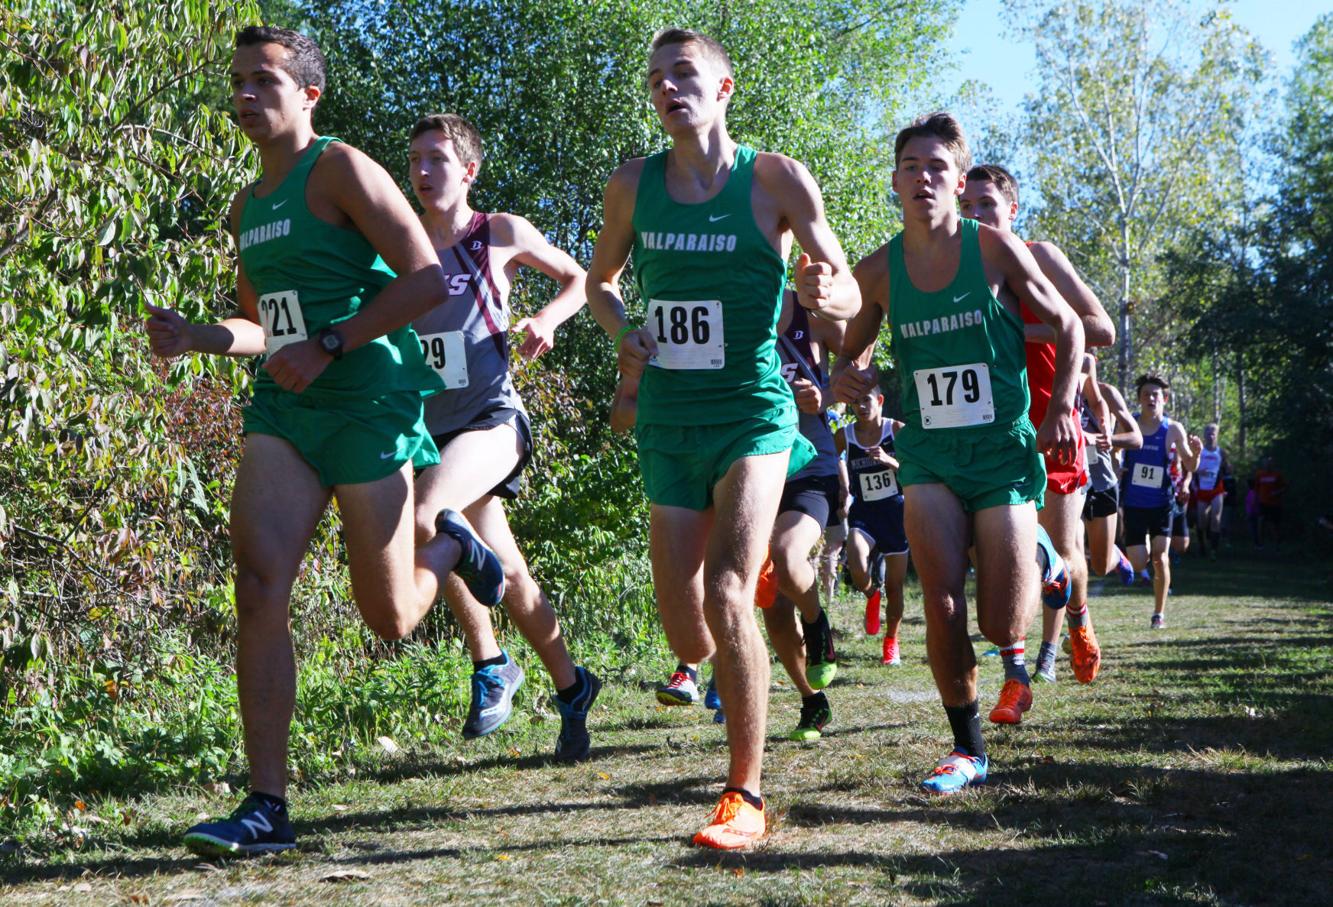 The New Prairie cross country semistate at a glance